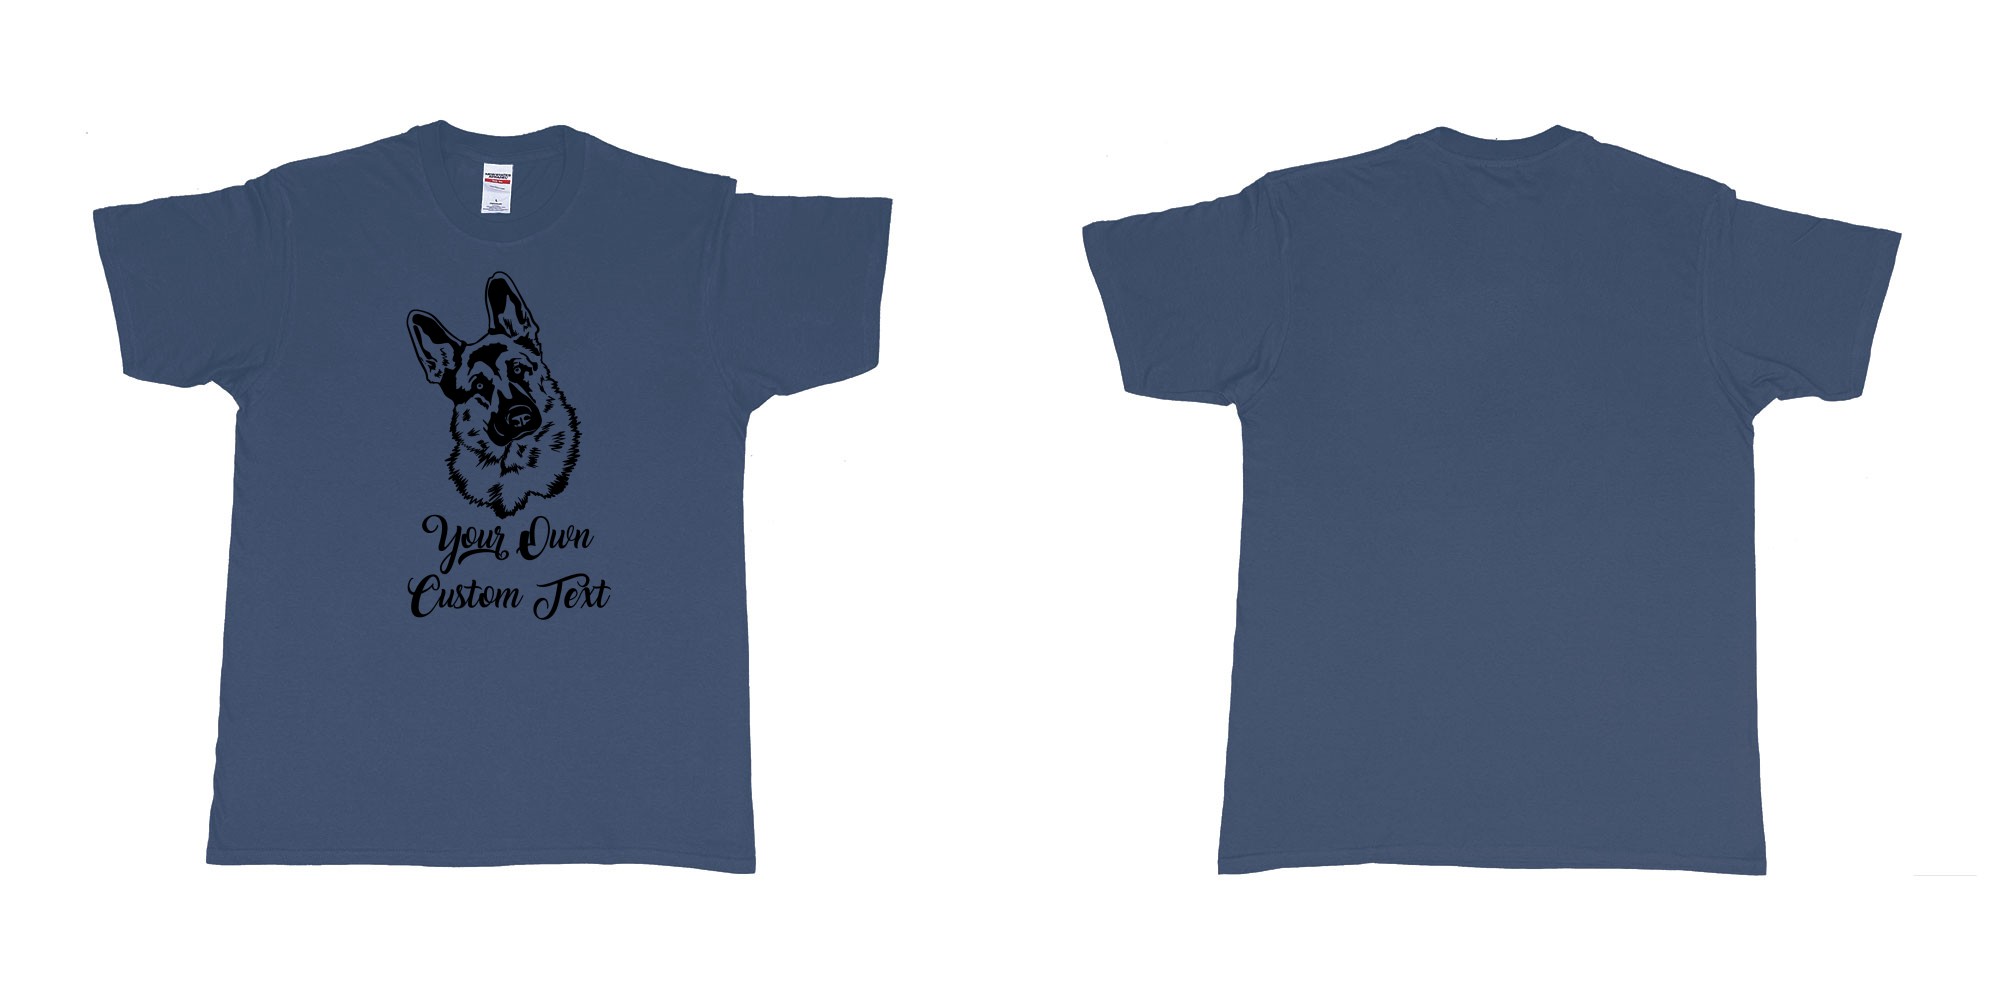 Custom tshirt design zack german shepherd tilts its head your own custom text in fabric color navy choice your own text made in Bali by The Pirate Way